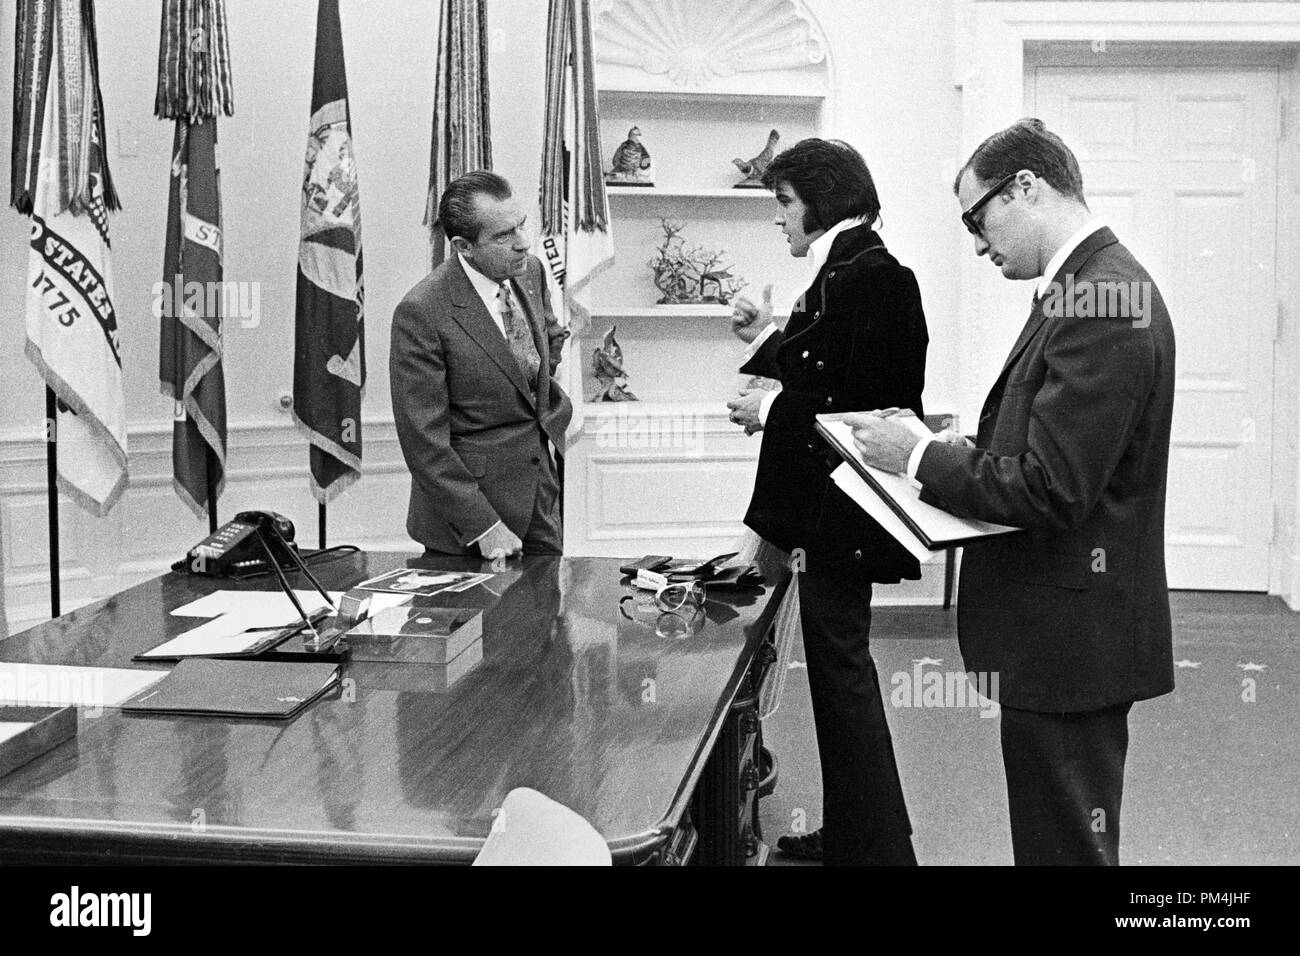 President Richard Nixon meets with Elvis Presley December 21, 1970 at the White House. Photo by Ollie Atkins / NARA   File Reference # 1003 777THA Stock Photo